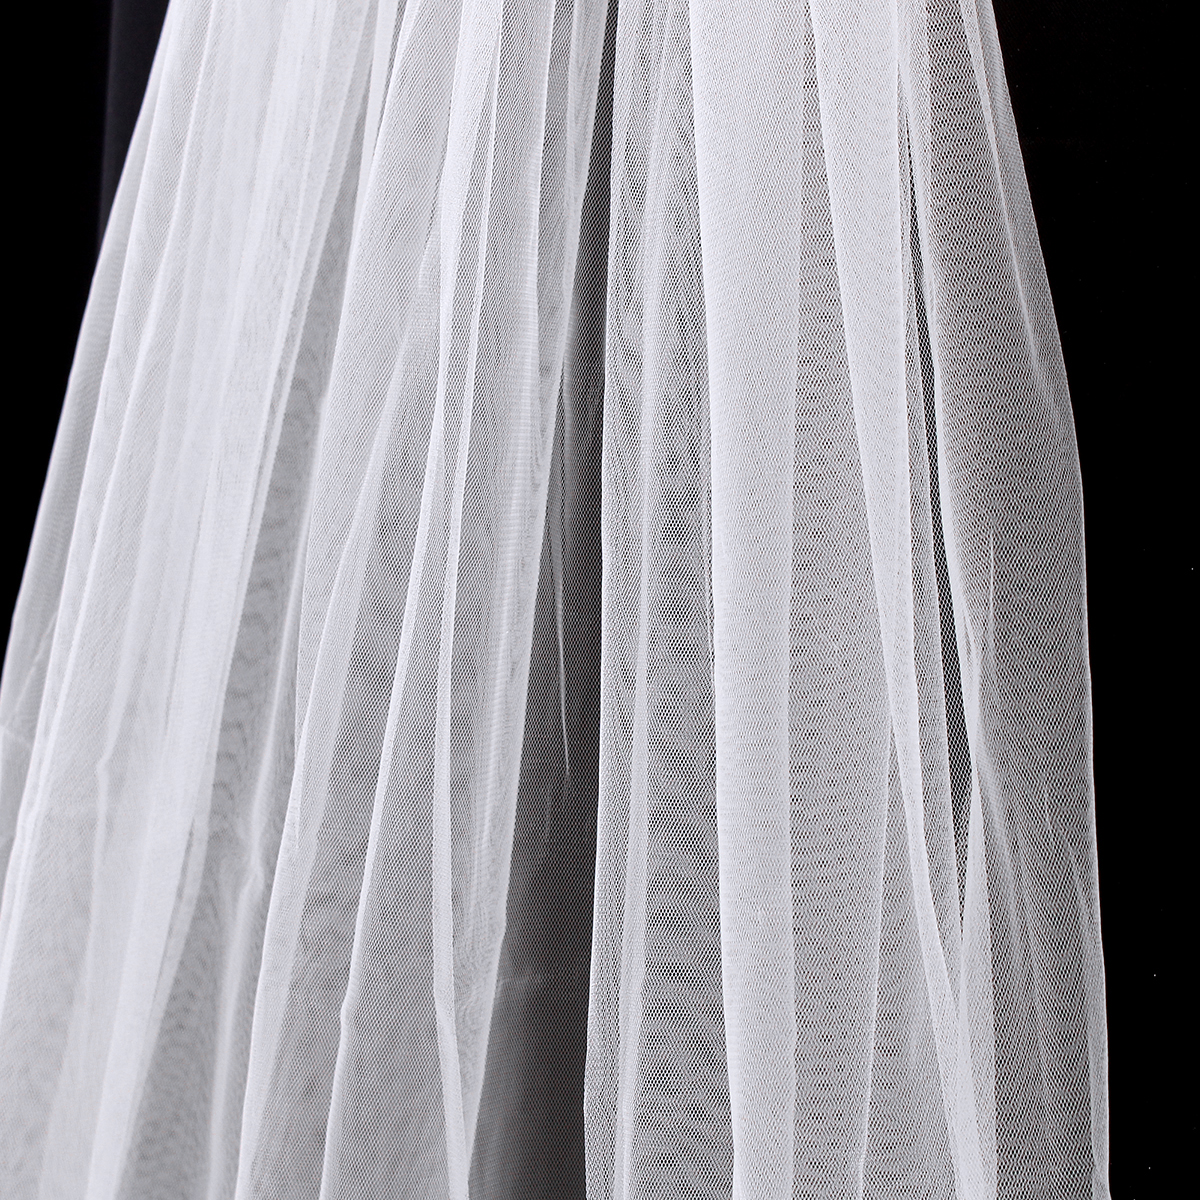 3M-Bride-White-Ivory-Elegant-Cathedral-Length-Wedding-Bridal-Veil-Comb-With-Lace-Edge-1102566